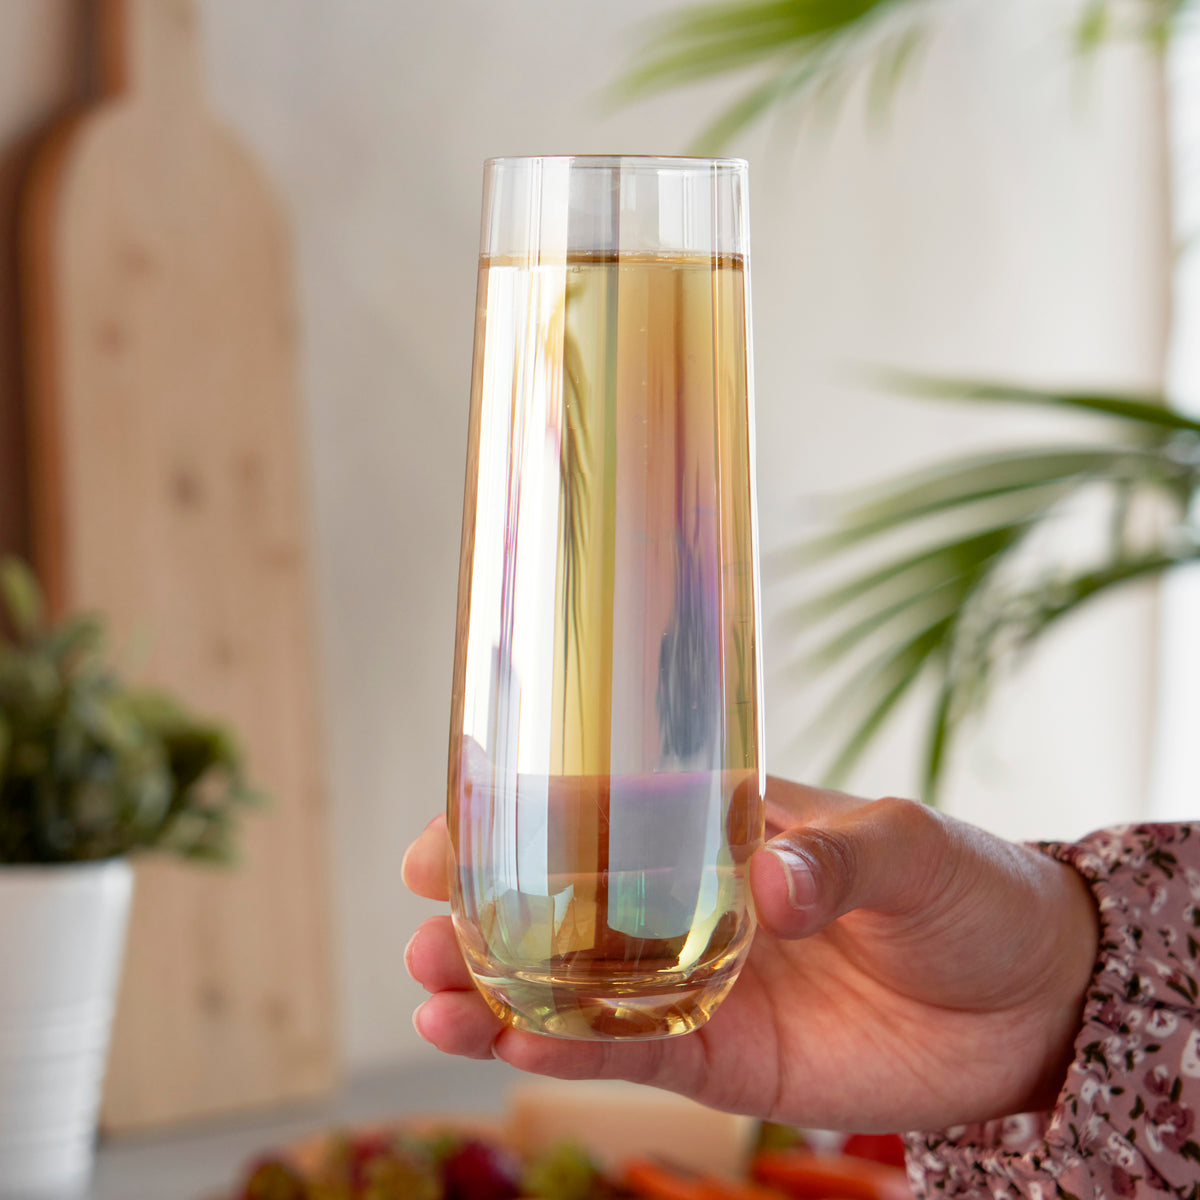 Iridescent Stemless Champagne Flute, Toasting Flute Glass